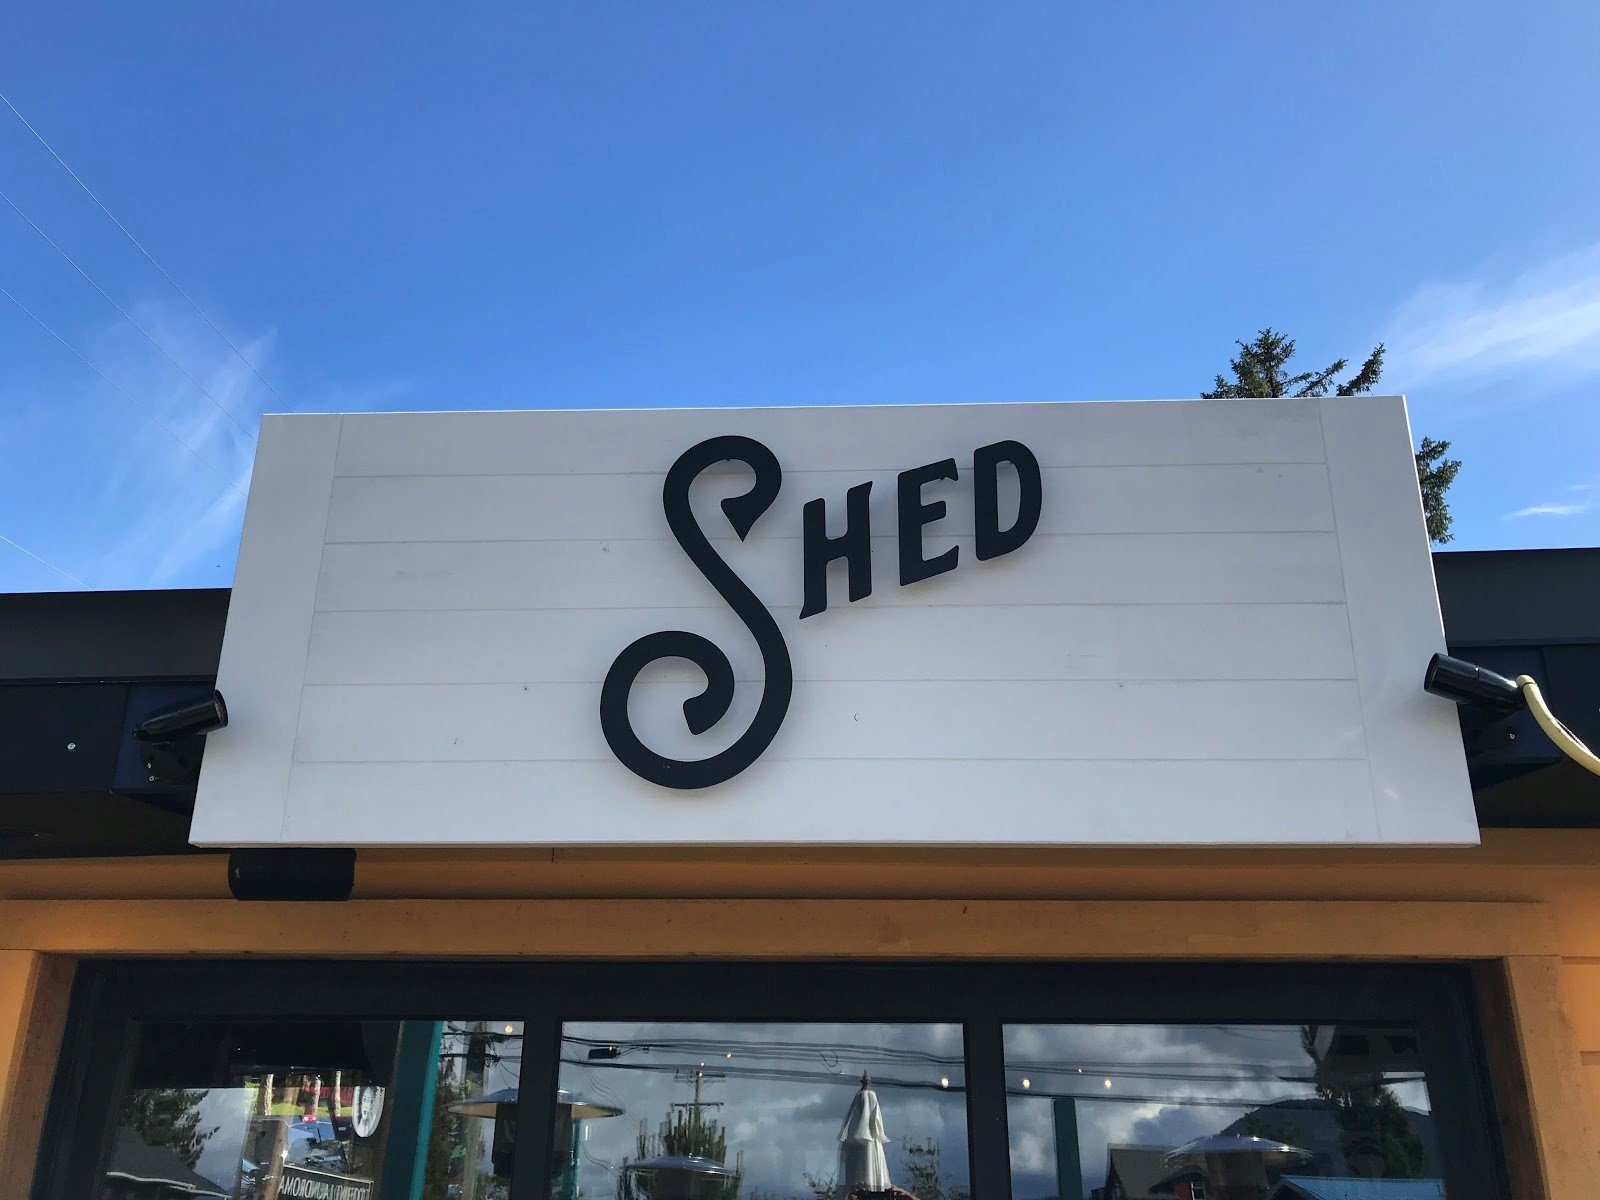 Customer Footage: Construction Time Lapse of Shed Restaurant, Tofino BC